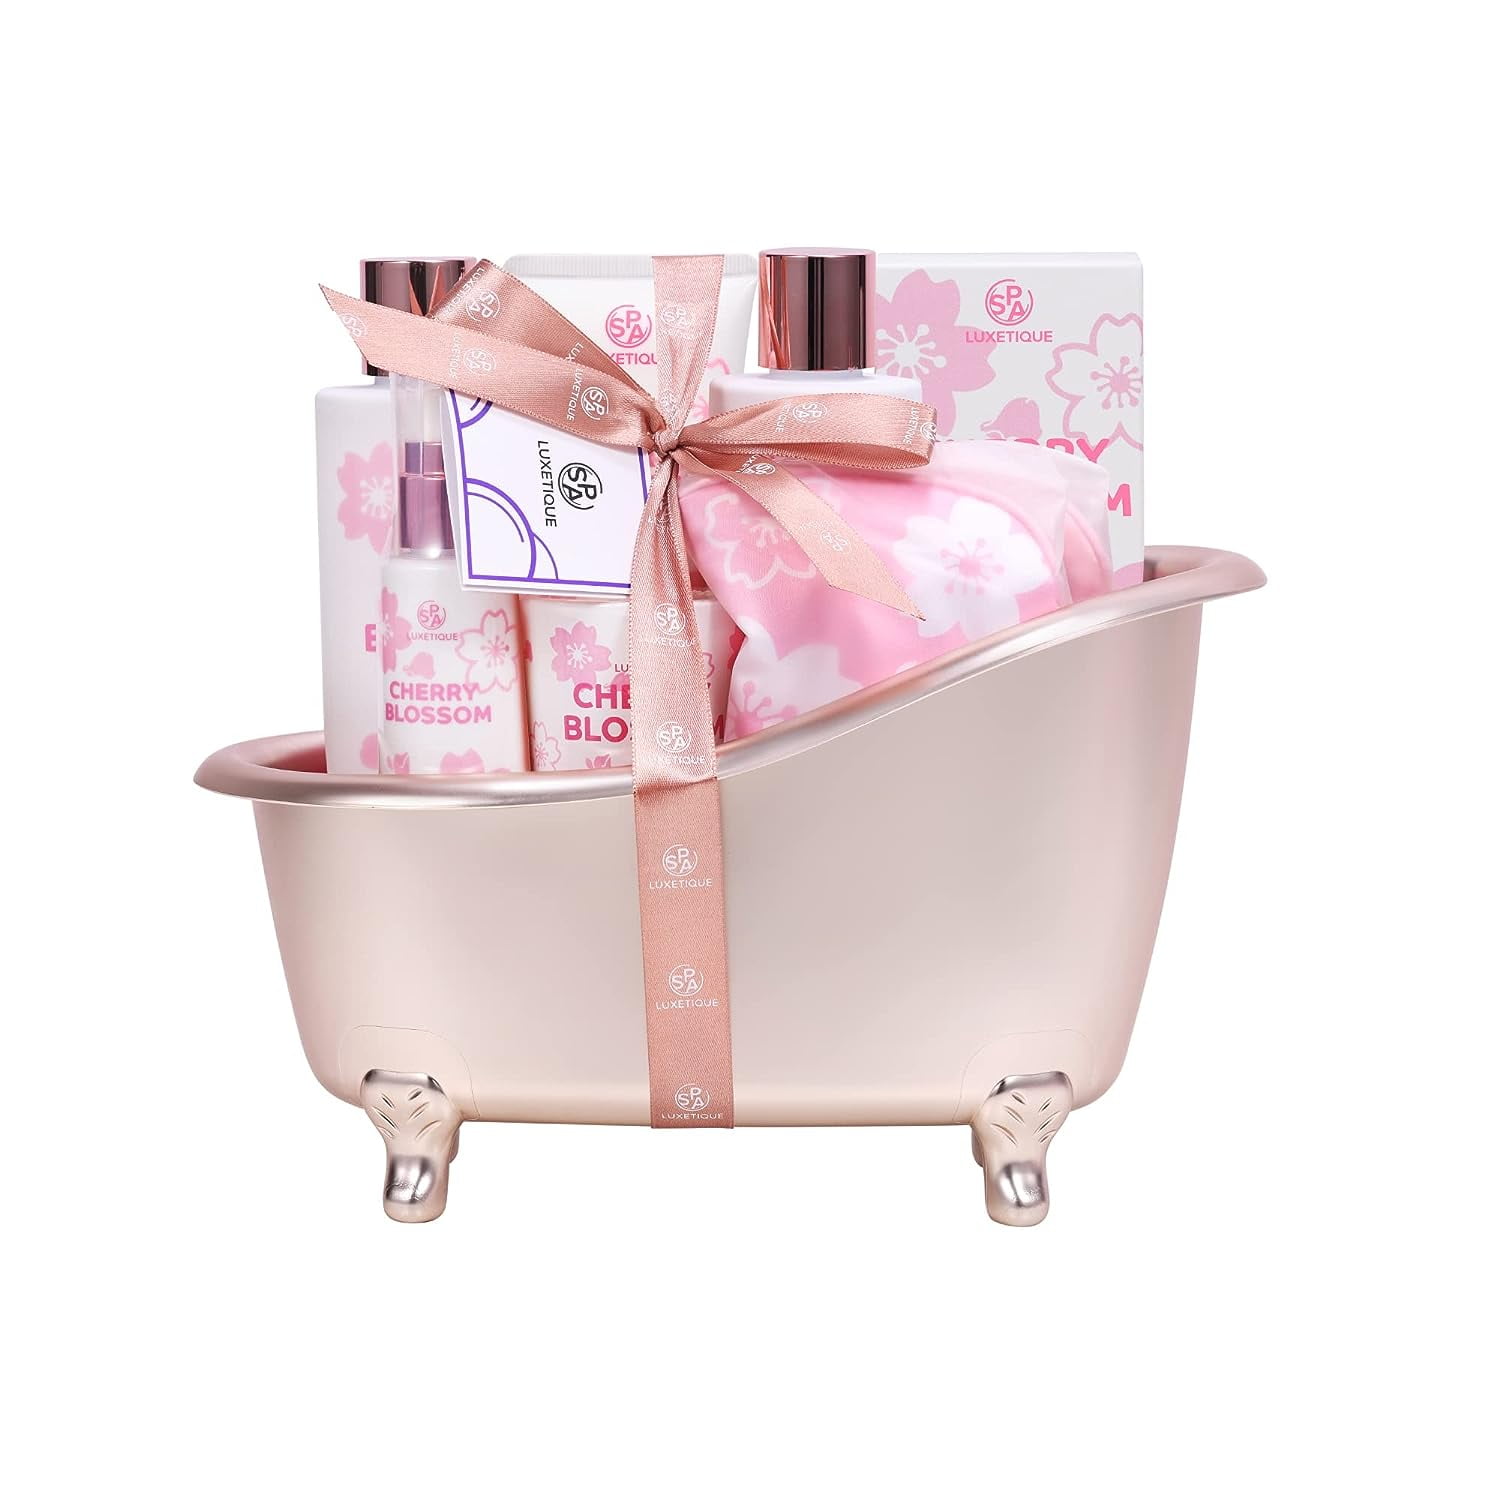 Birthday Gifts for Women - Luxurious Gift Set Relaxing Spa Gift Box inclu  Unique Coffee Mugs, Bath Loofah, Dry Hair Towel Unique Gifts for Women Mom  Her Wife Sister Friends Girlfriend Daughter